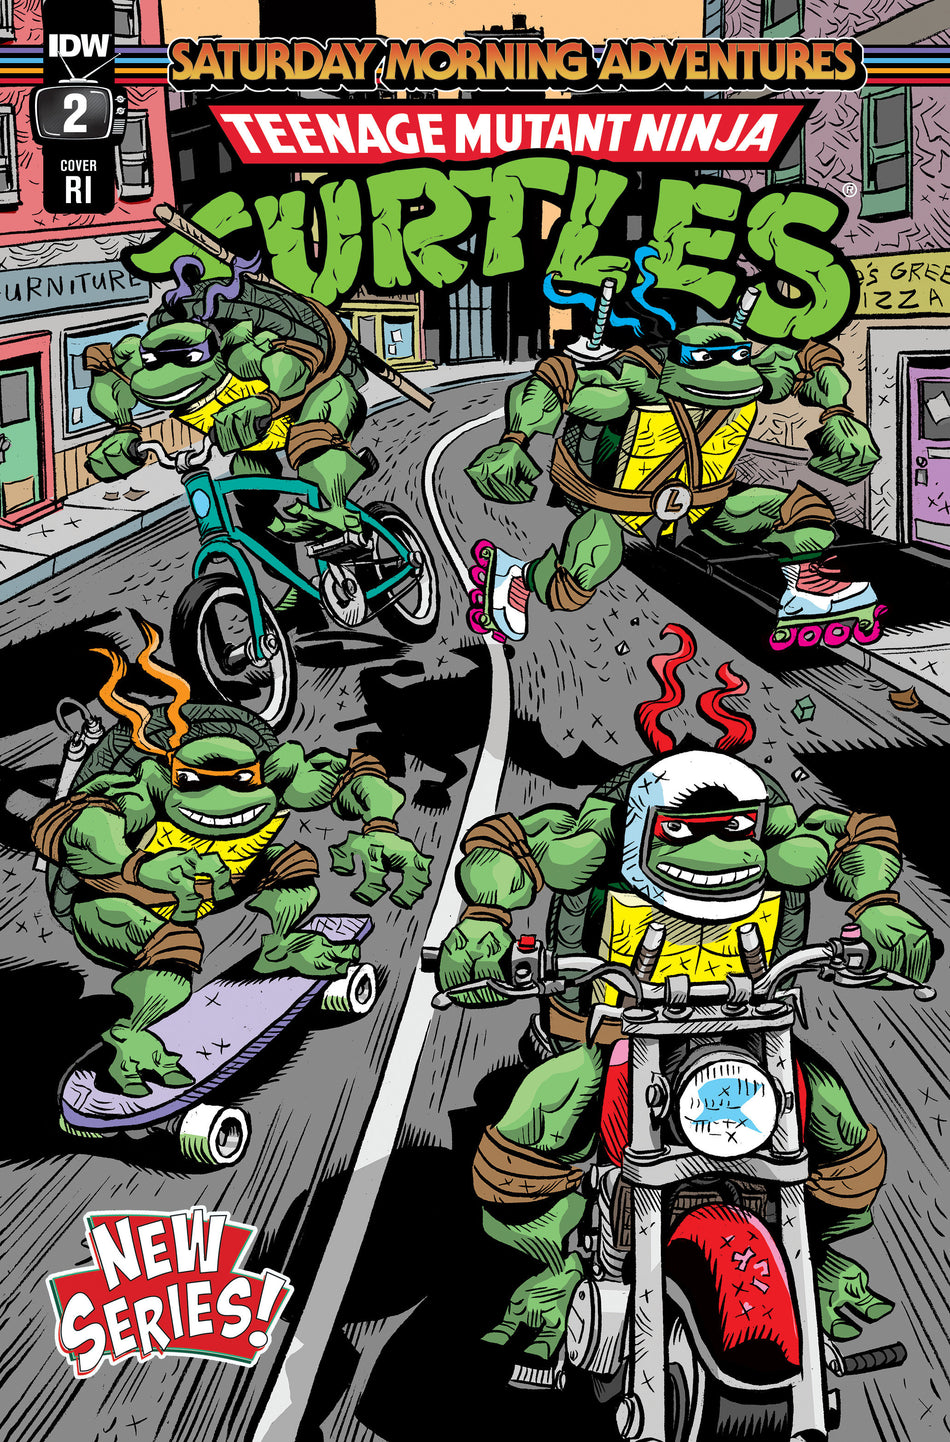 Stock Photo of Teenage Mutant Ninja Turtles: Saturday Morning Adventures (2023-) #2 RI 1:10 Lawson Variant comic sold by Stronghold Collectibles